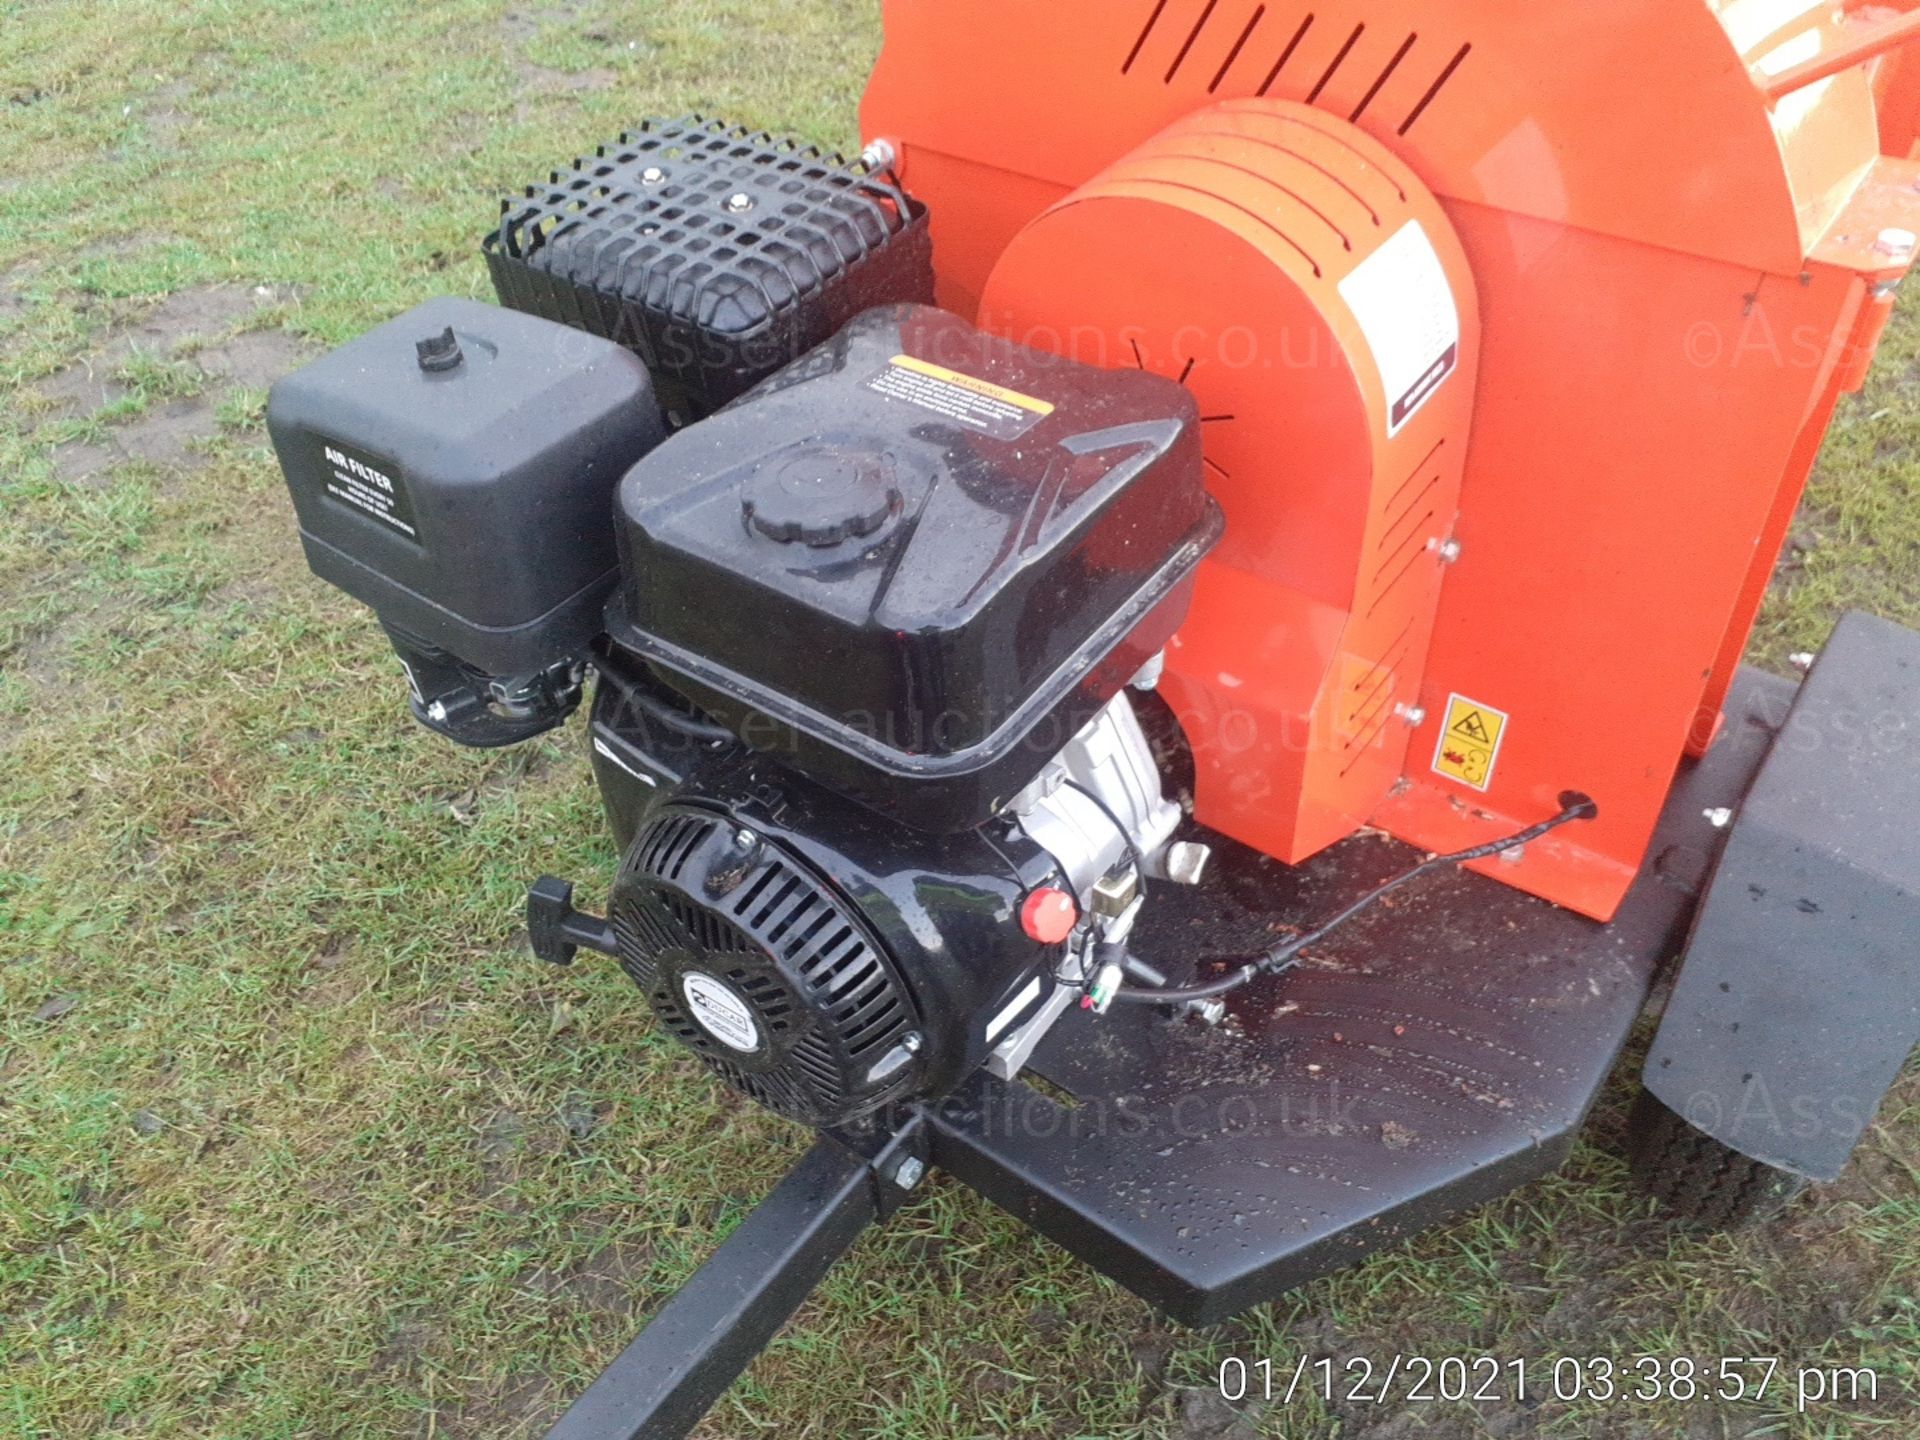 BRAND NEW AND UNUSED DGS1500 420CC 4.5Ó TOWABLE PETROL WOOD CHIPPER *NO VAT* - Image 7 of 11